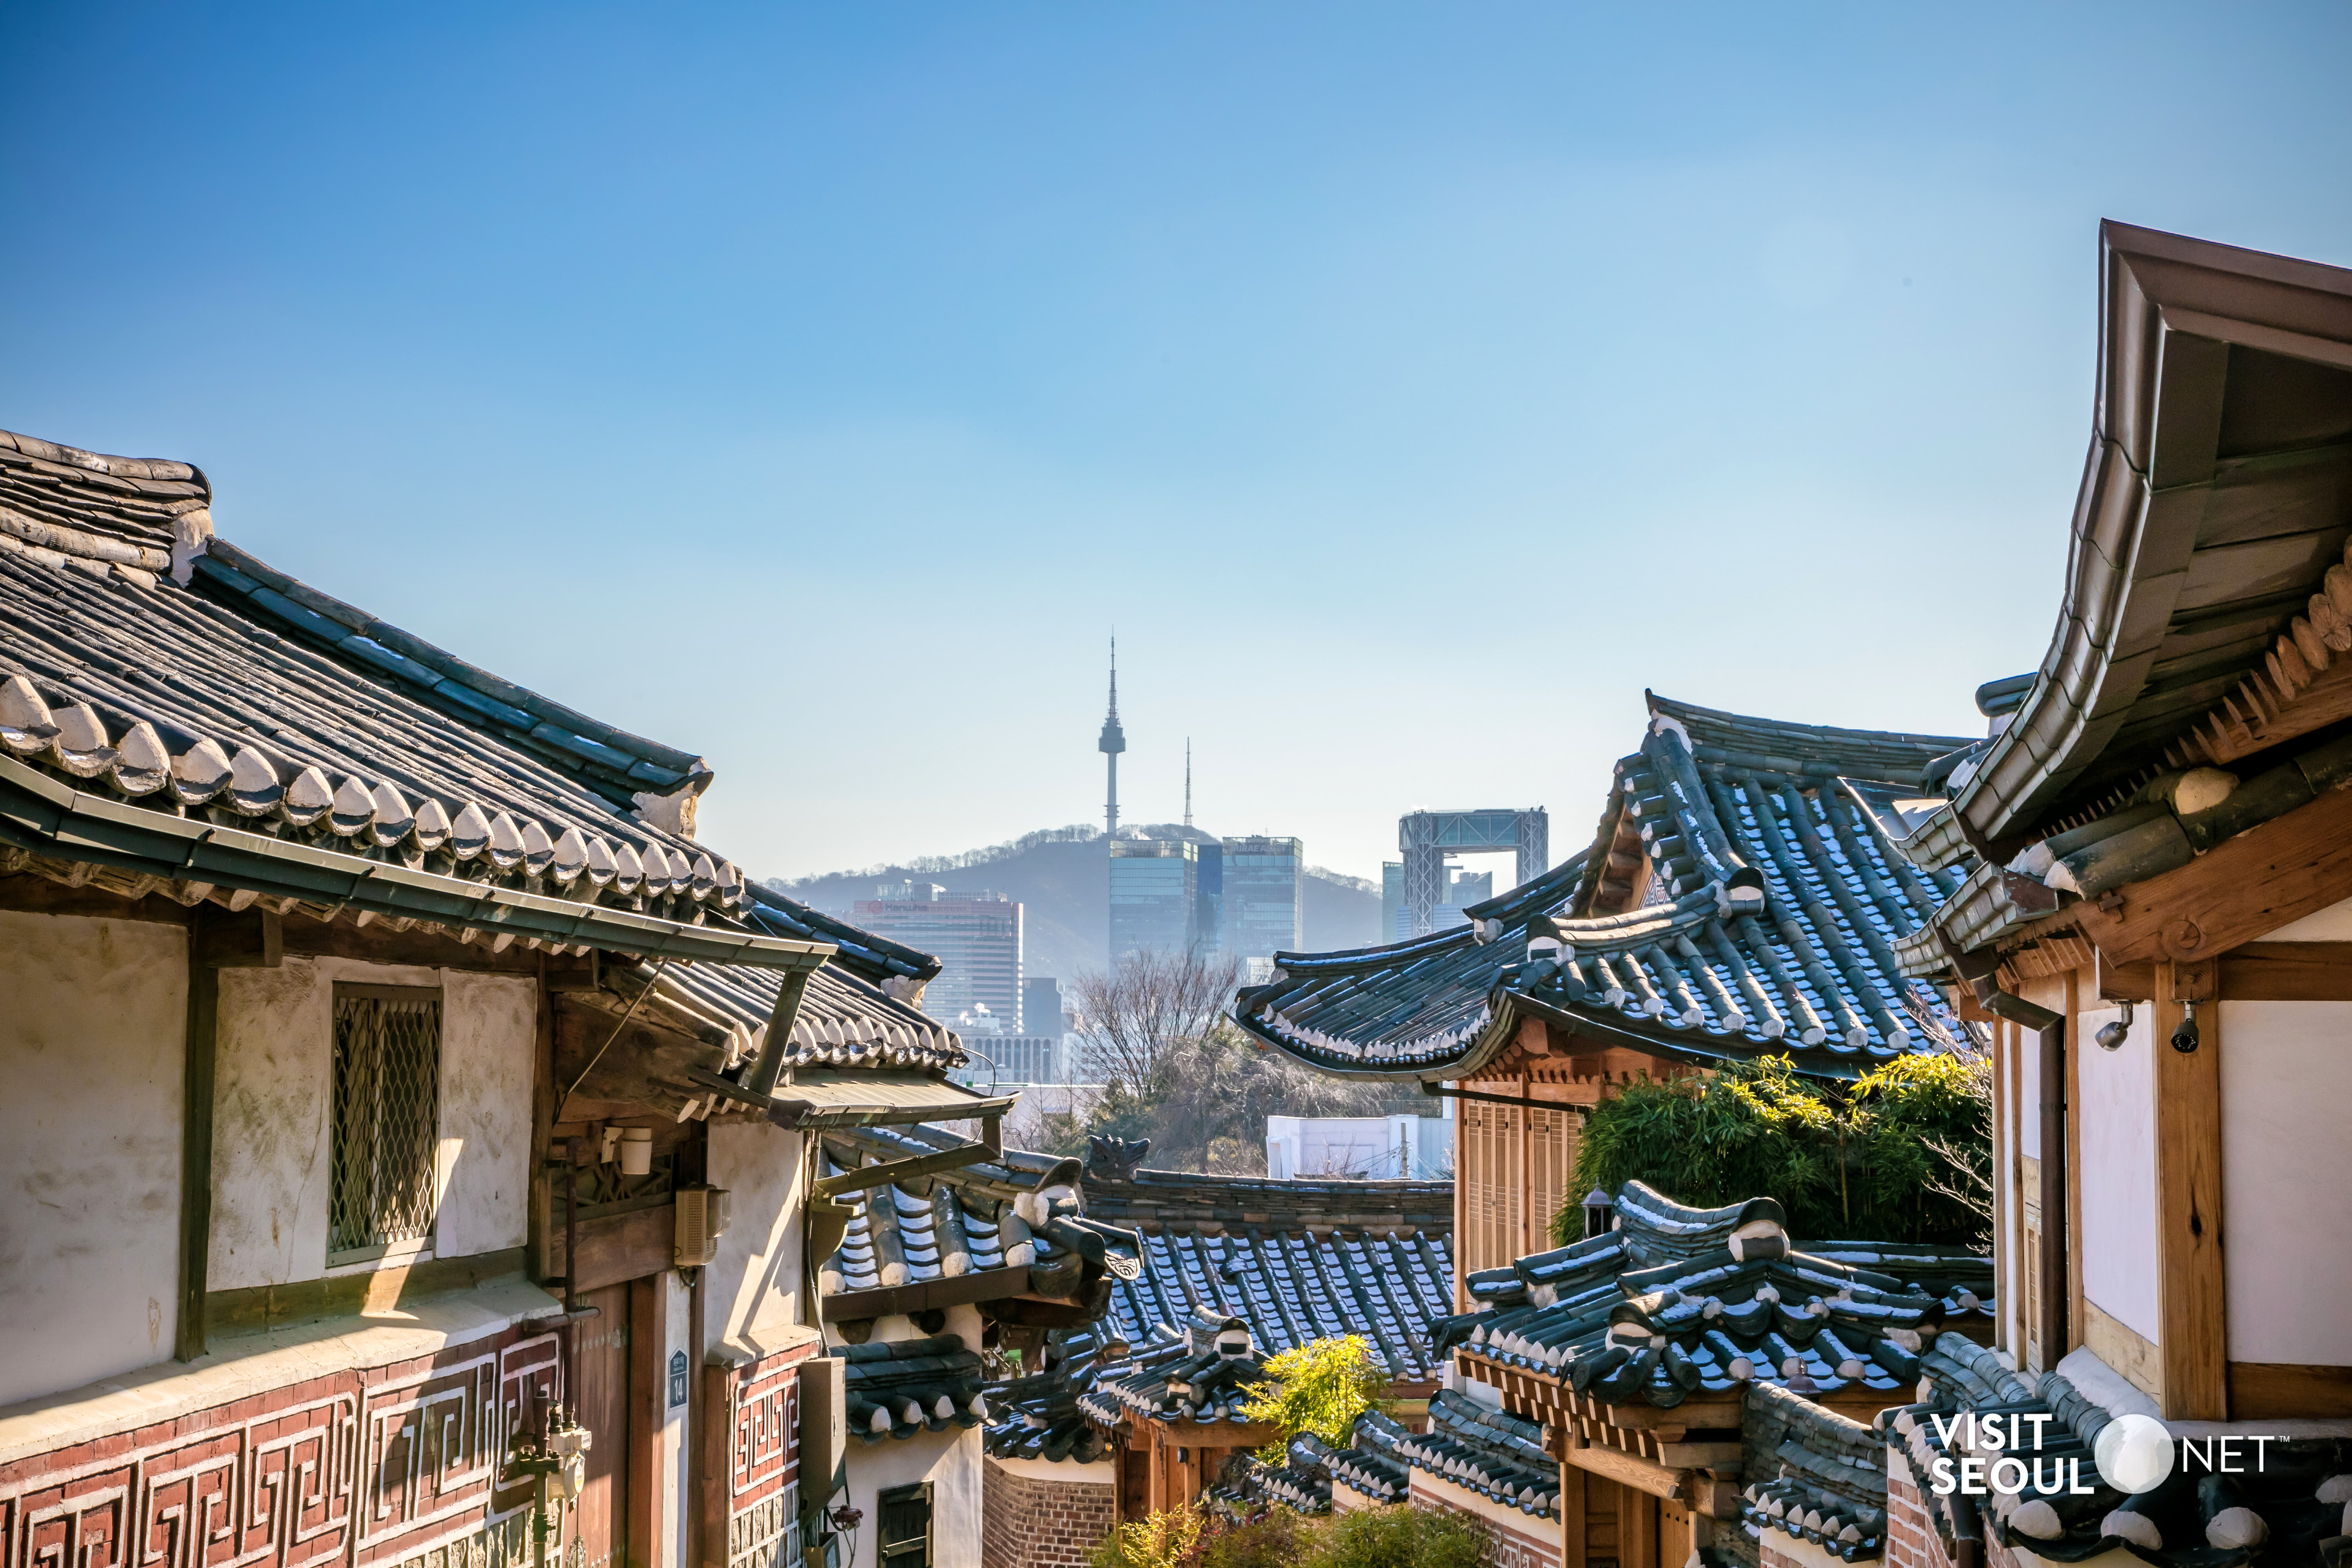 Movement route0 : The view of the hanok village with N Seoul Tower in the background and the crowded hanok